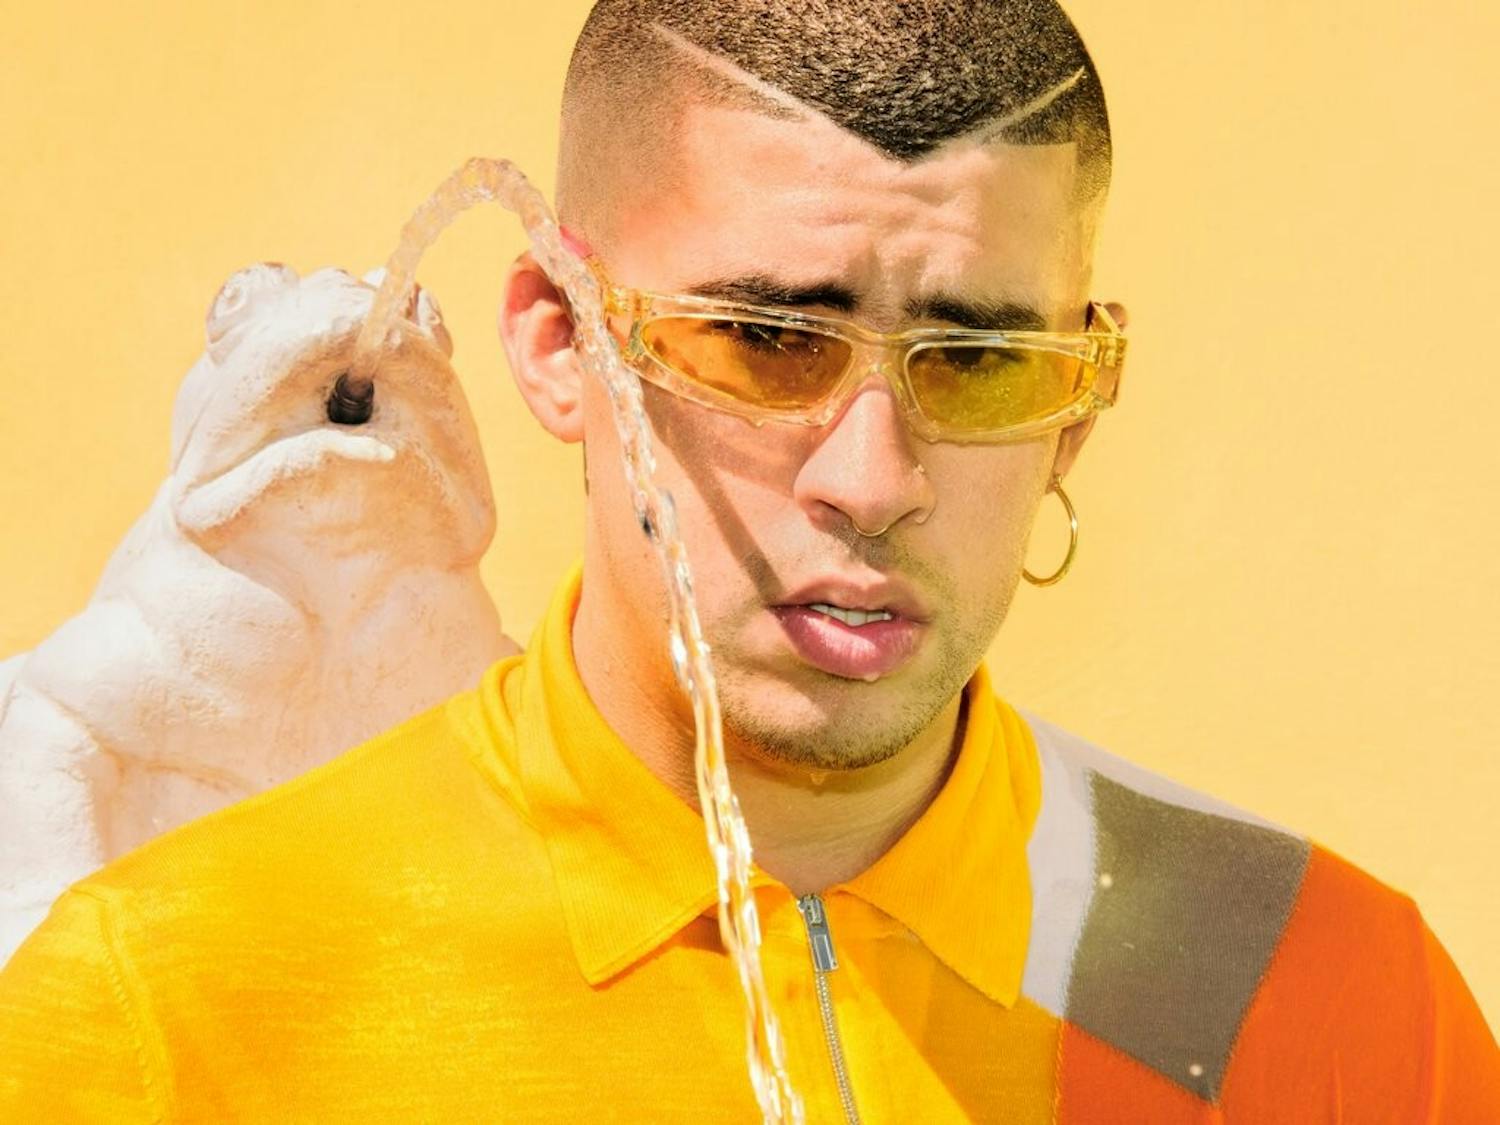 Puerto Rican rap star Bad Bunny is at the top of his game right now, one of a few musicians able to still deliver during a disappointing year.